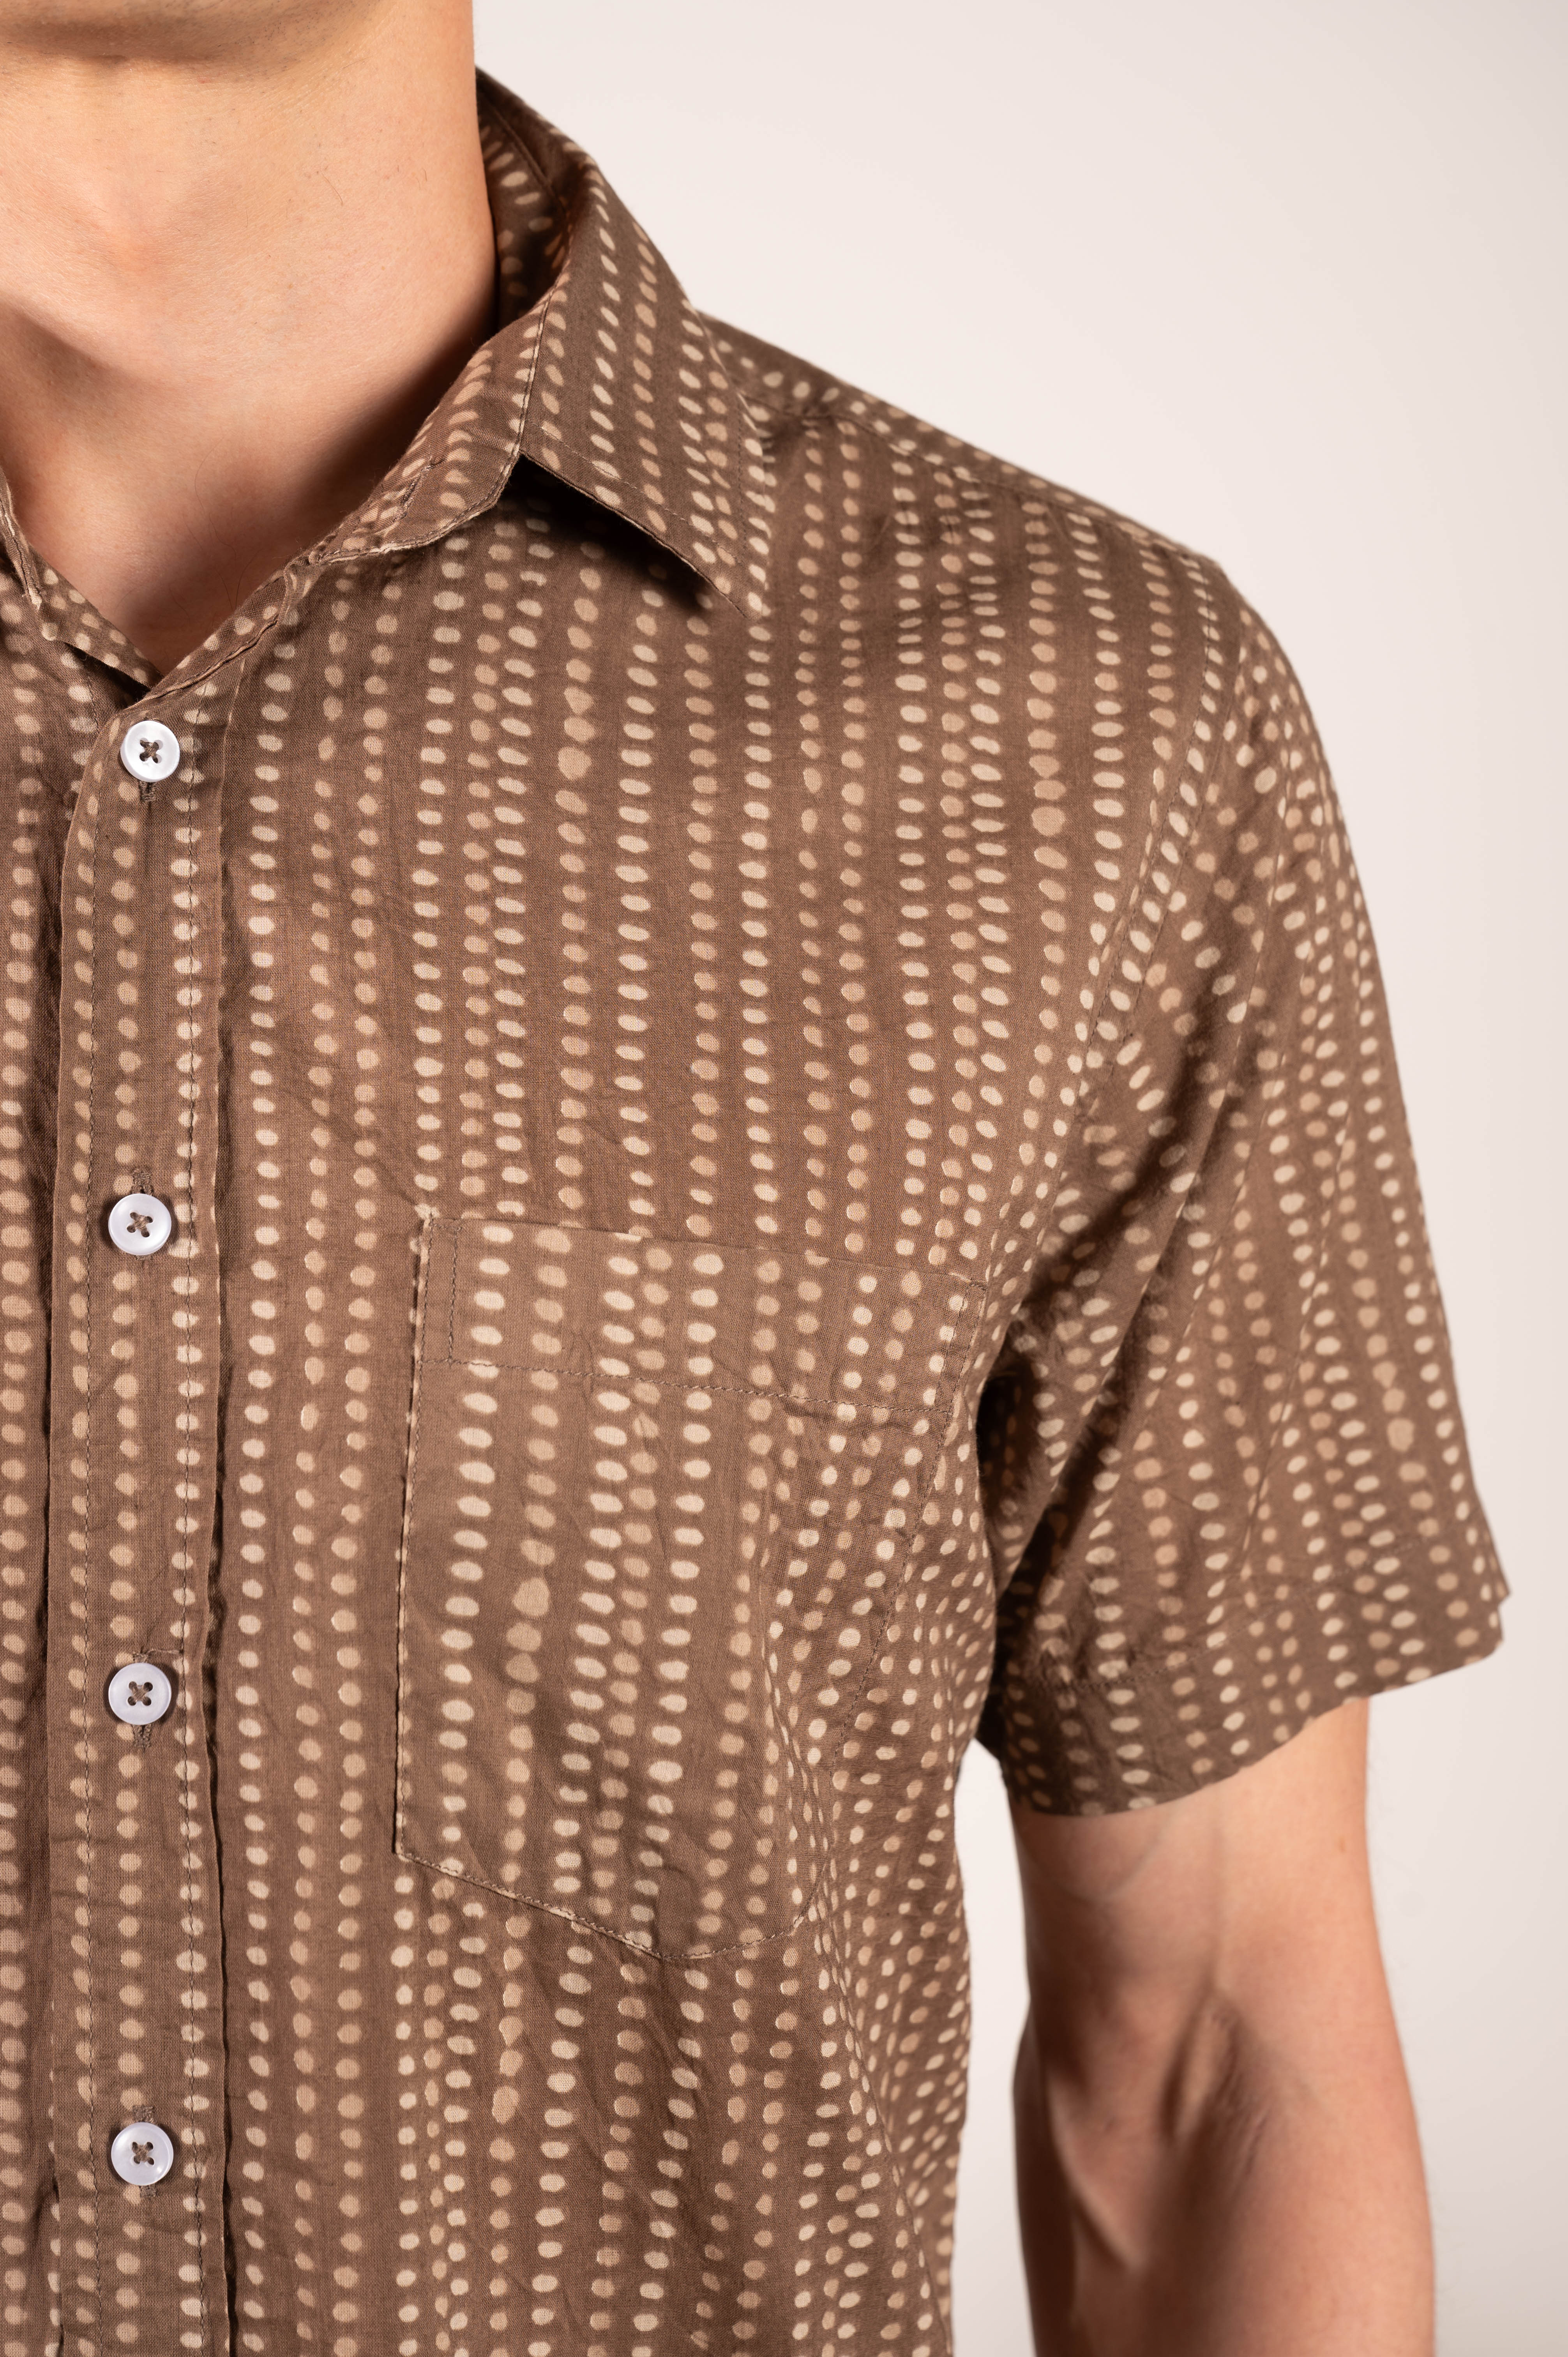 Hand Printed 'The Folk' Short Sleeve Shirt in Brown Bubbles Print